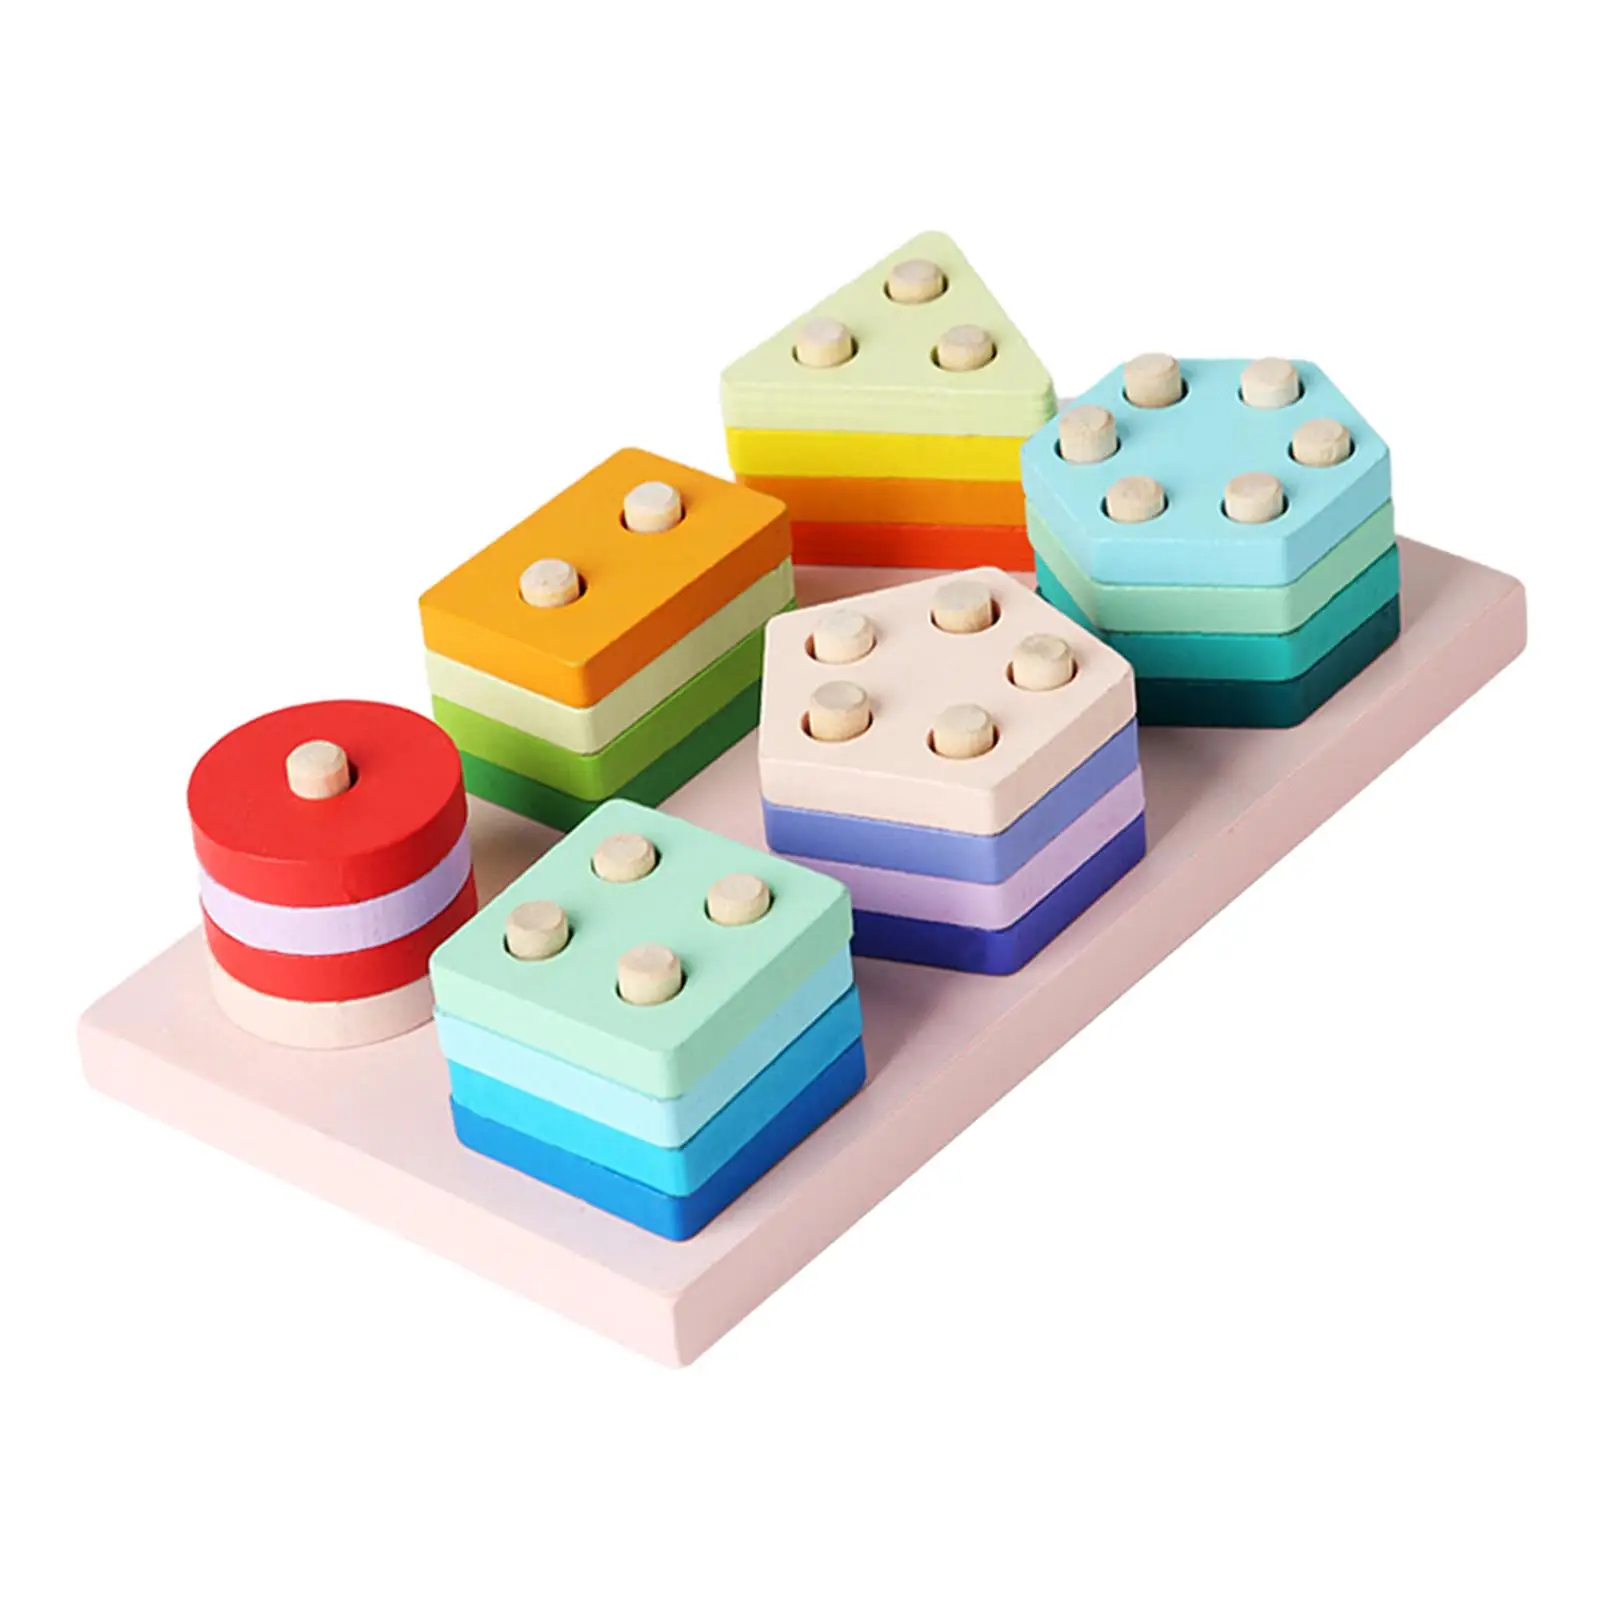 Wooden Sorting Matching Puzzle Preschool Learning Activity Sensory Toy Wood Shape Stacking Toy for Boys Girls Children Kids